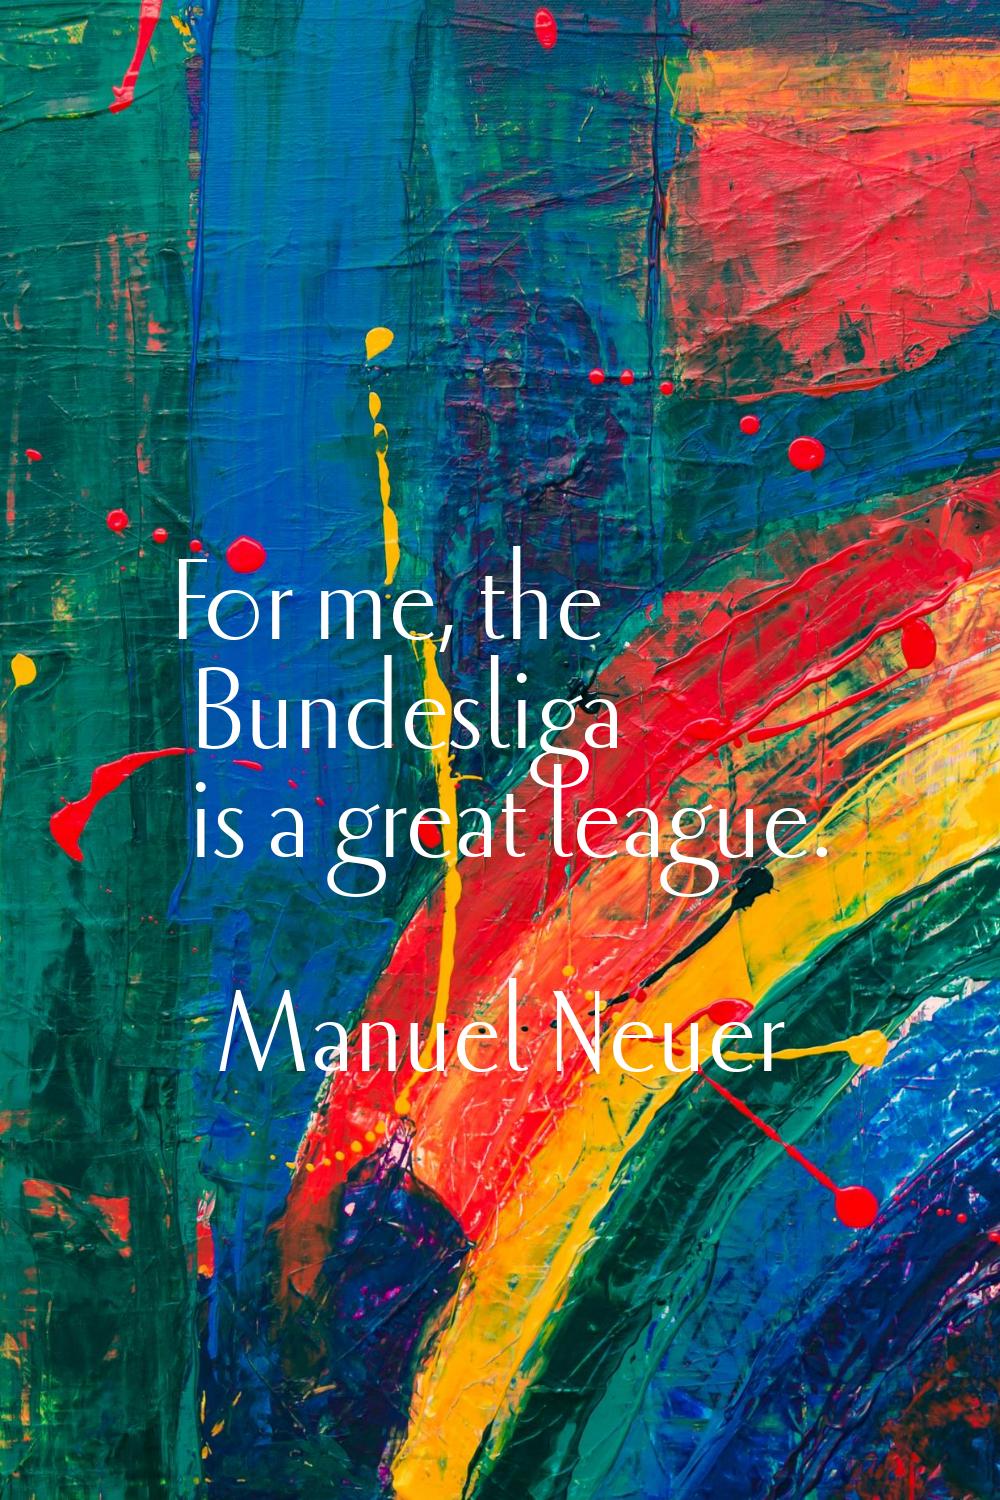 For me, the Bundesliga is a great league.